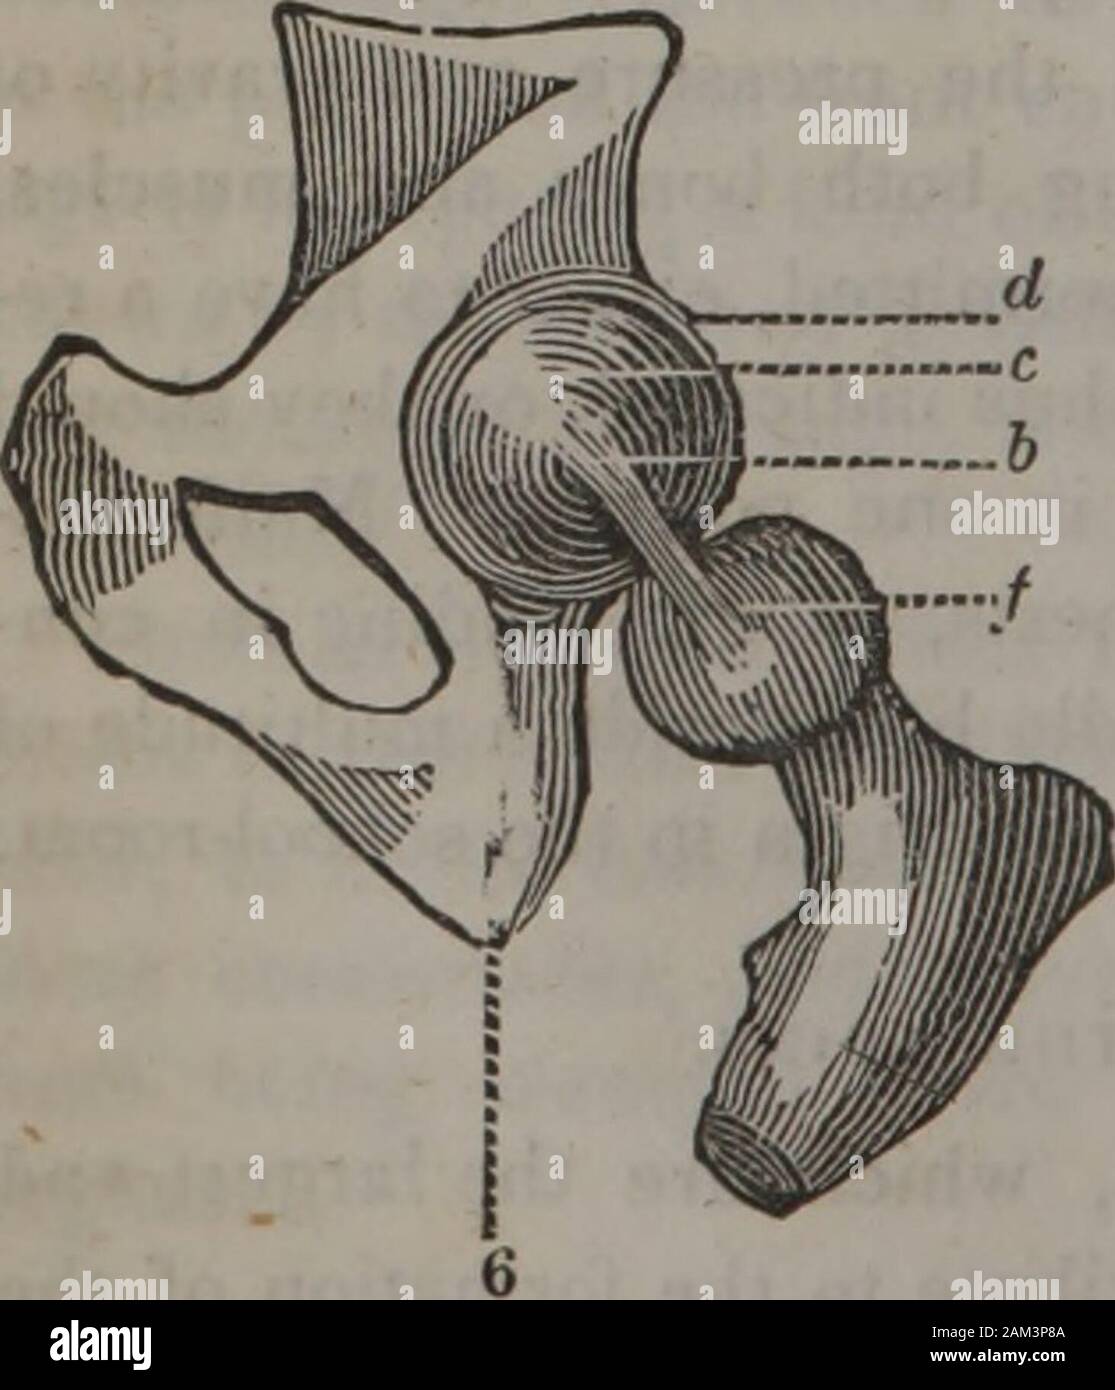 The class-book of anatomy : designed for schools, explanatory of the first principles of human mechanism, as the basis of physical education . Explanations of Fig. 10.This is a drawing of one ofthe lumbar vertebras, — in thesmall of the bark, in commonlanguage It is much larger,and contains considerable moresubstance than those of theback or neck ; — and. it re-quires to be so, as it necessarilysupports the weight of the bodyabove: a is the body ; b b thethe surfaces by which it formsa joint with the block above :ecu. similar surface, to meetthe one below ; d d the sidearms or processes, to wh Stock Photo